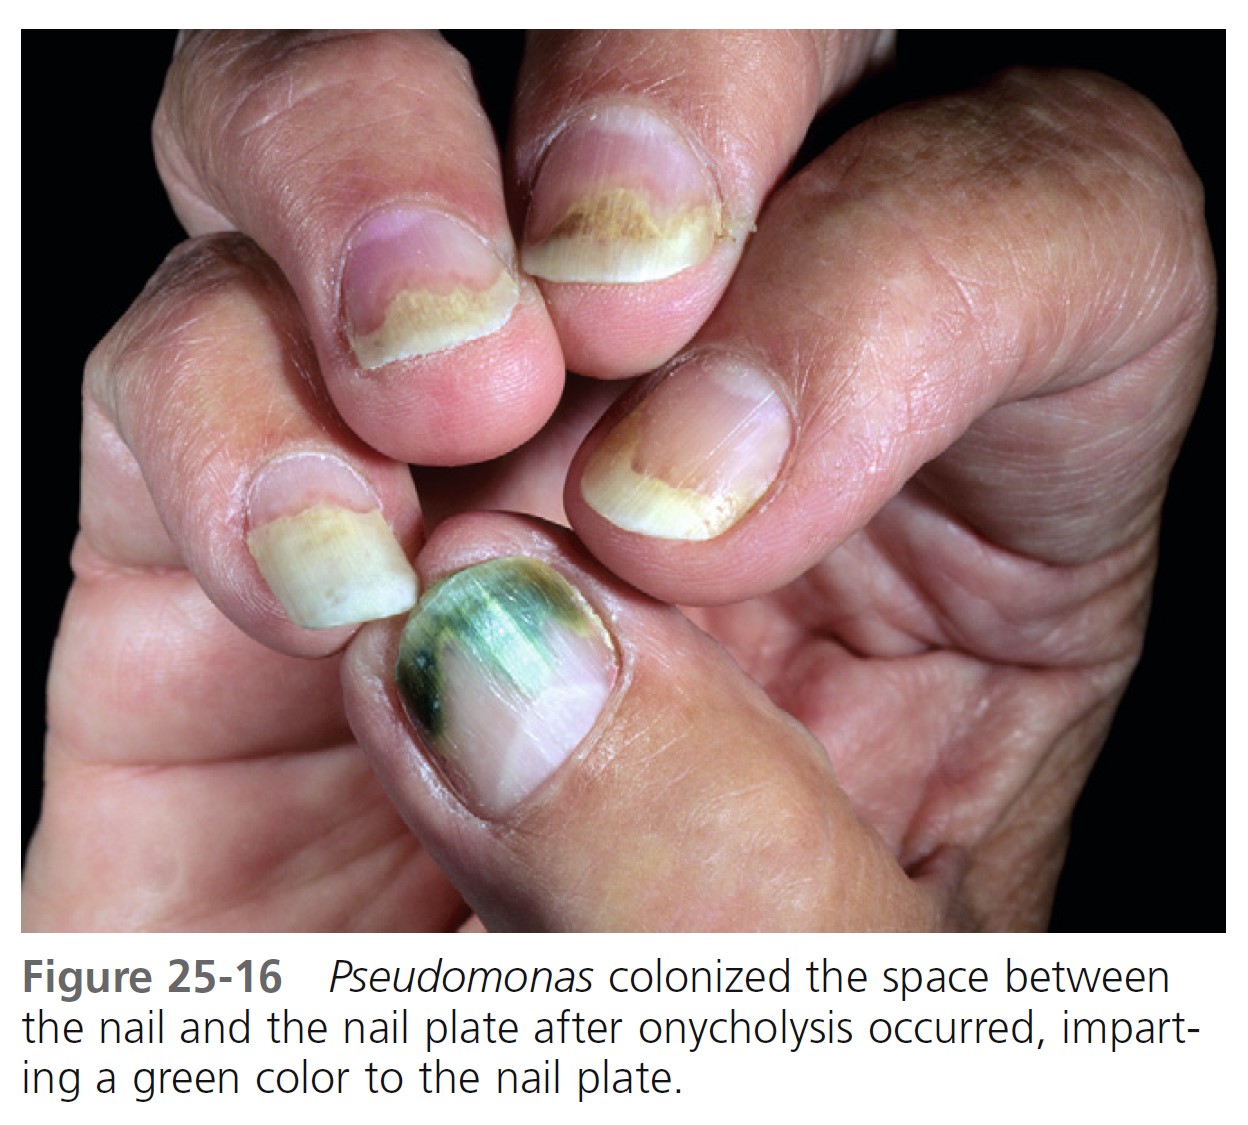 Nails Changes and Disorders in Elderly Libyans